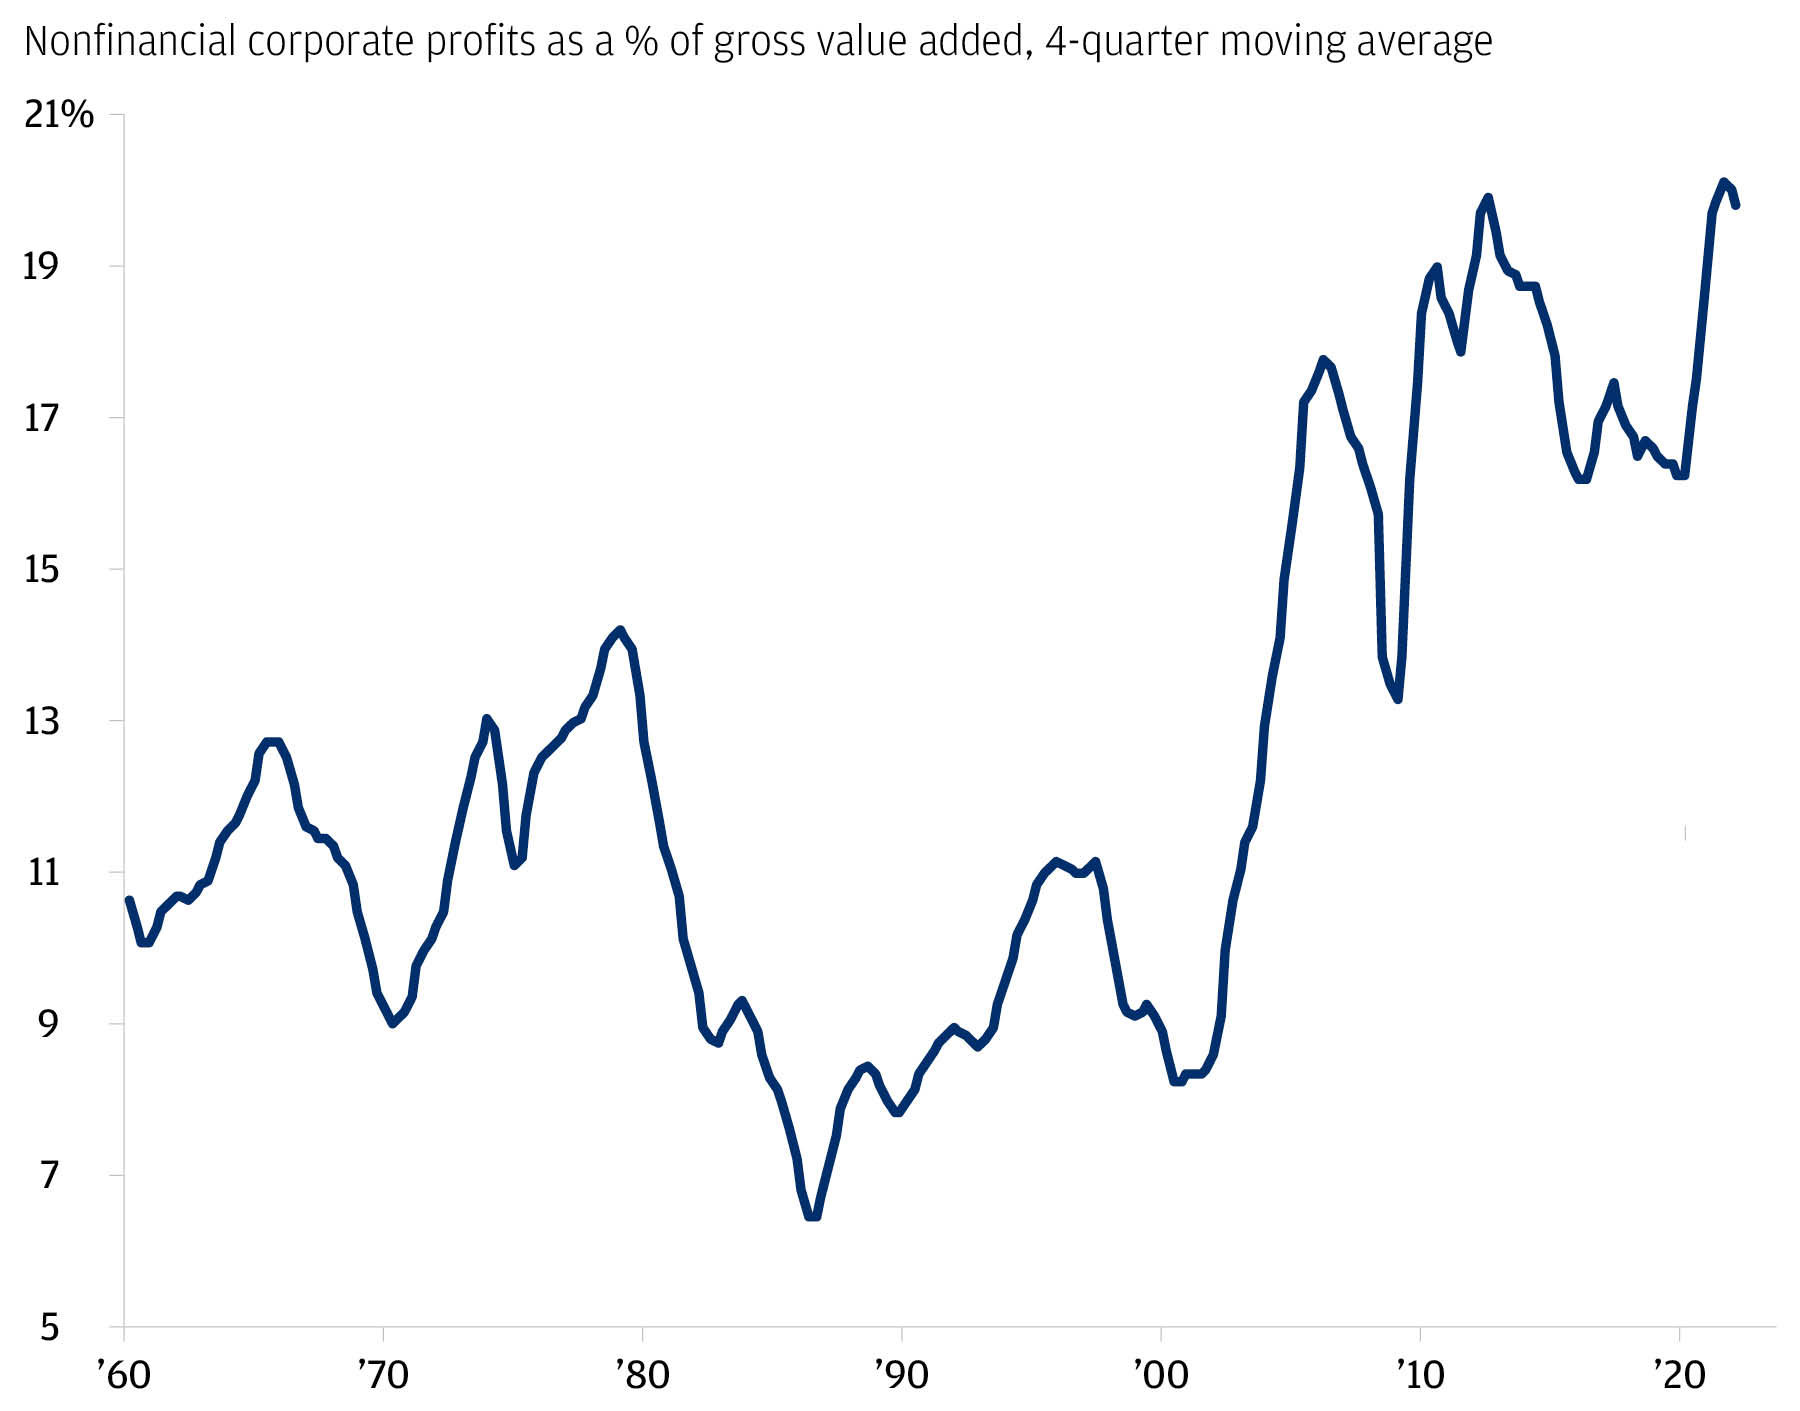 This chart shows nonfinancial corporate profits as a % of gross value added (4-quarter moving average) from 1960 to 2022.